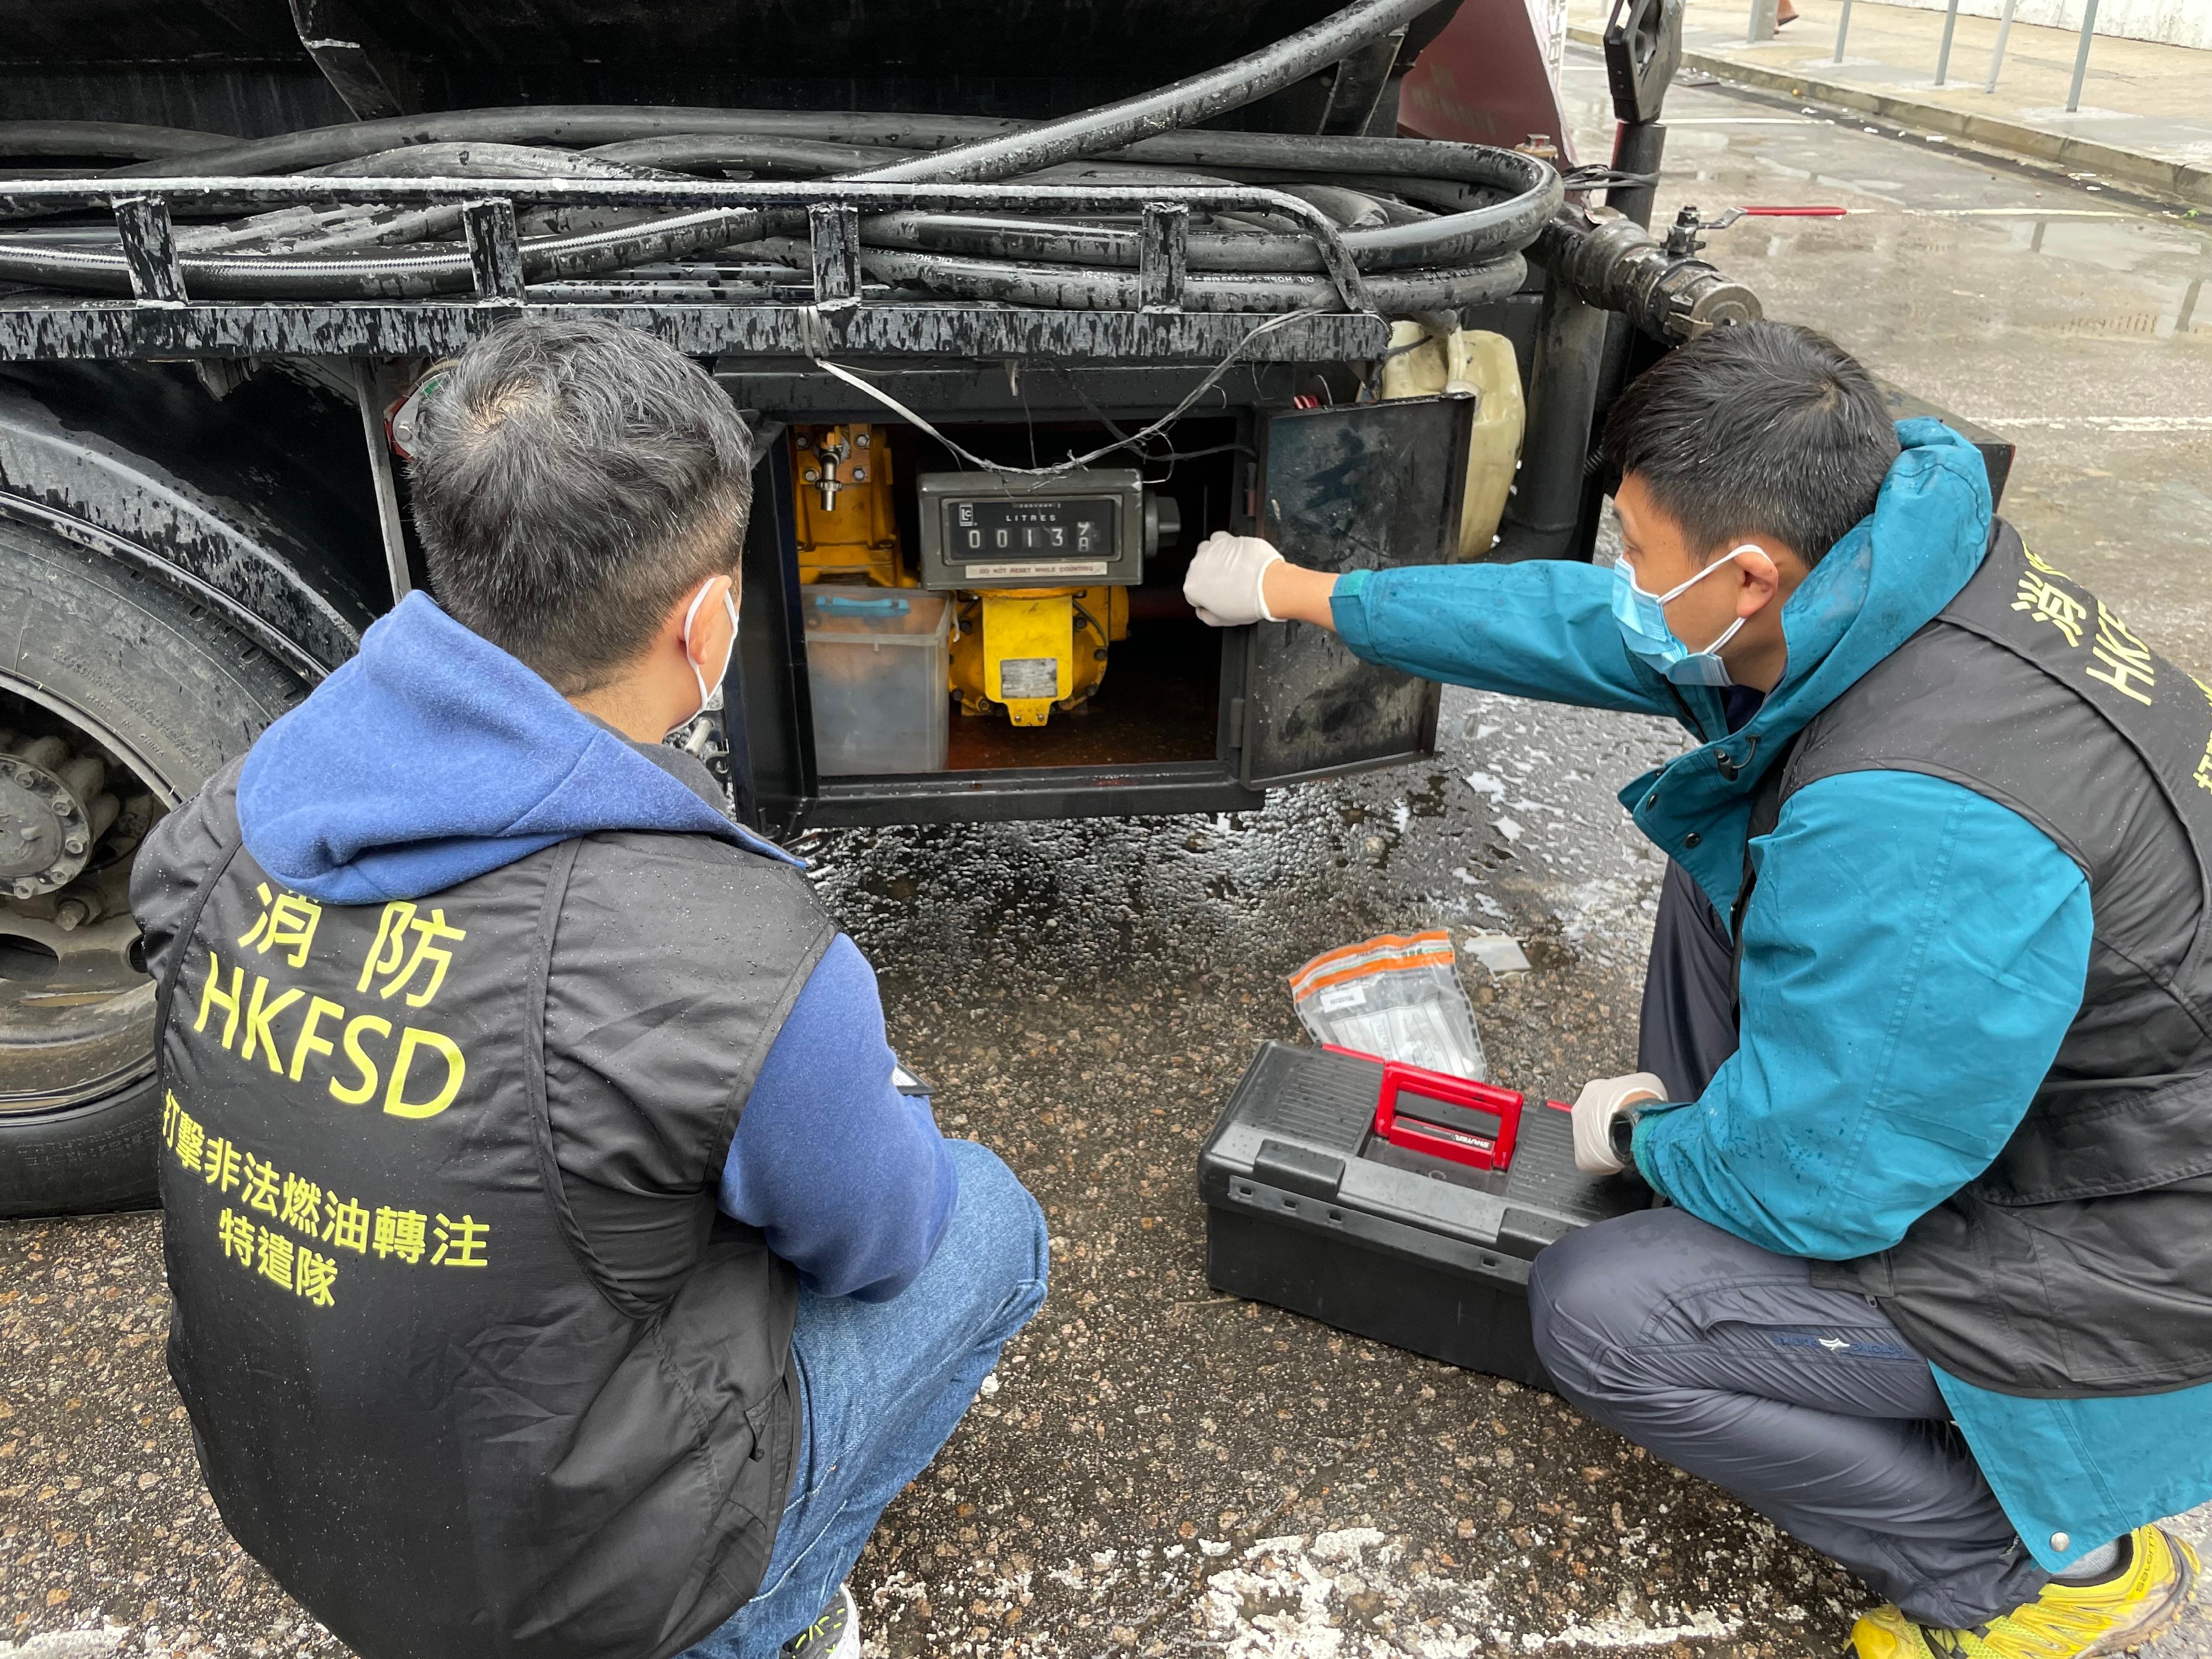 The Fire Services Department (FSD) and the Hong Kong Police Force mounted a joint operation to combat illicit fuelling activities today (March 28). Photo shows FSD law enforcement officers inspecting a dangerous goods vehicle suspected to be involved in the illicit fuelling activity during the joint operation.